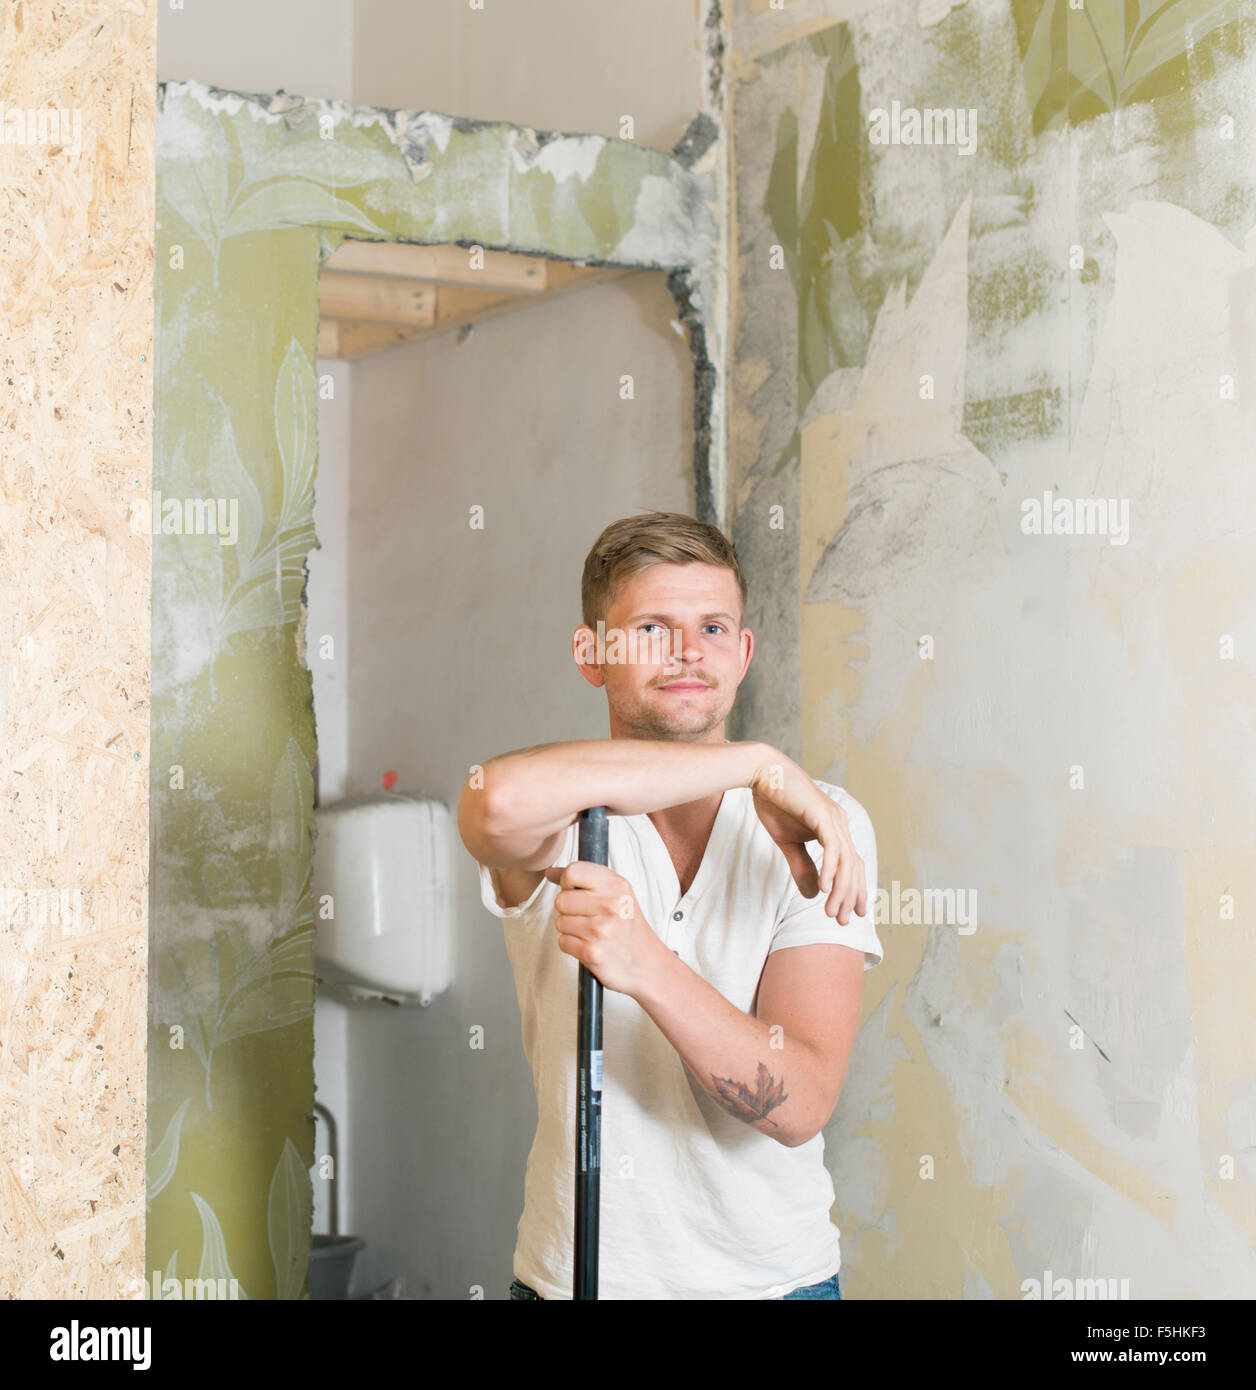 Sweden, Portrait of man renovating his home Stock Photo